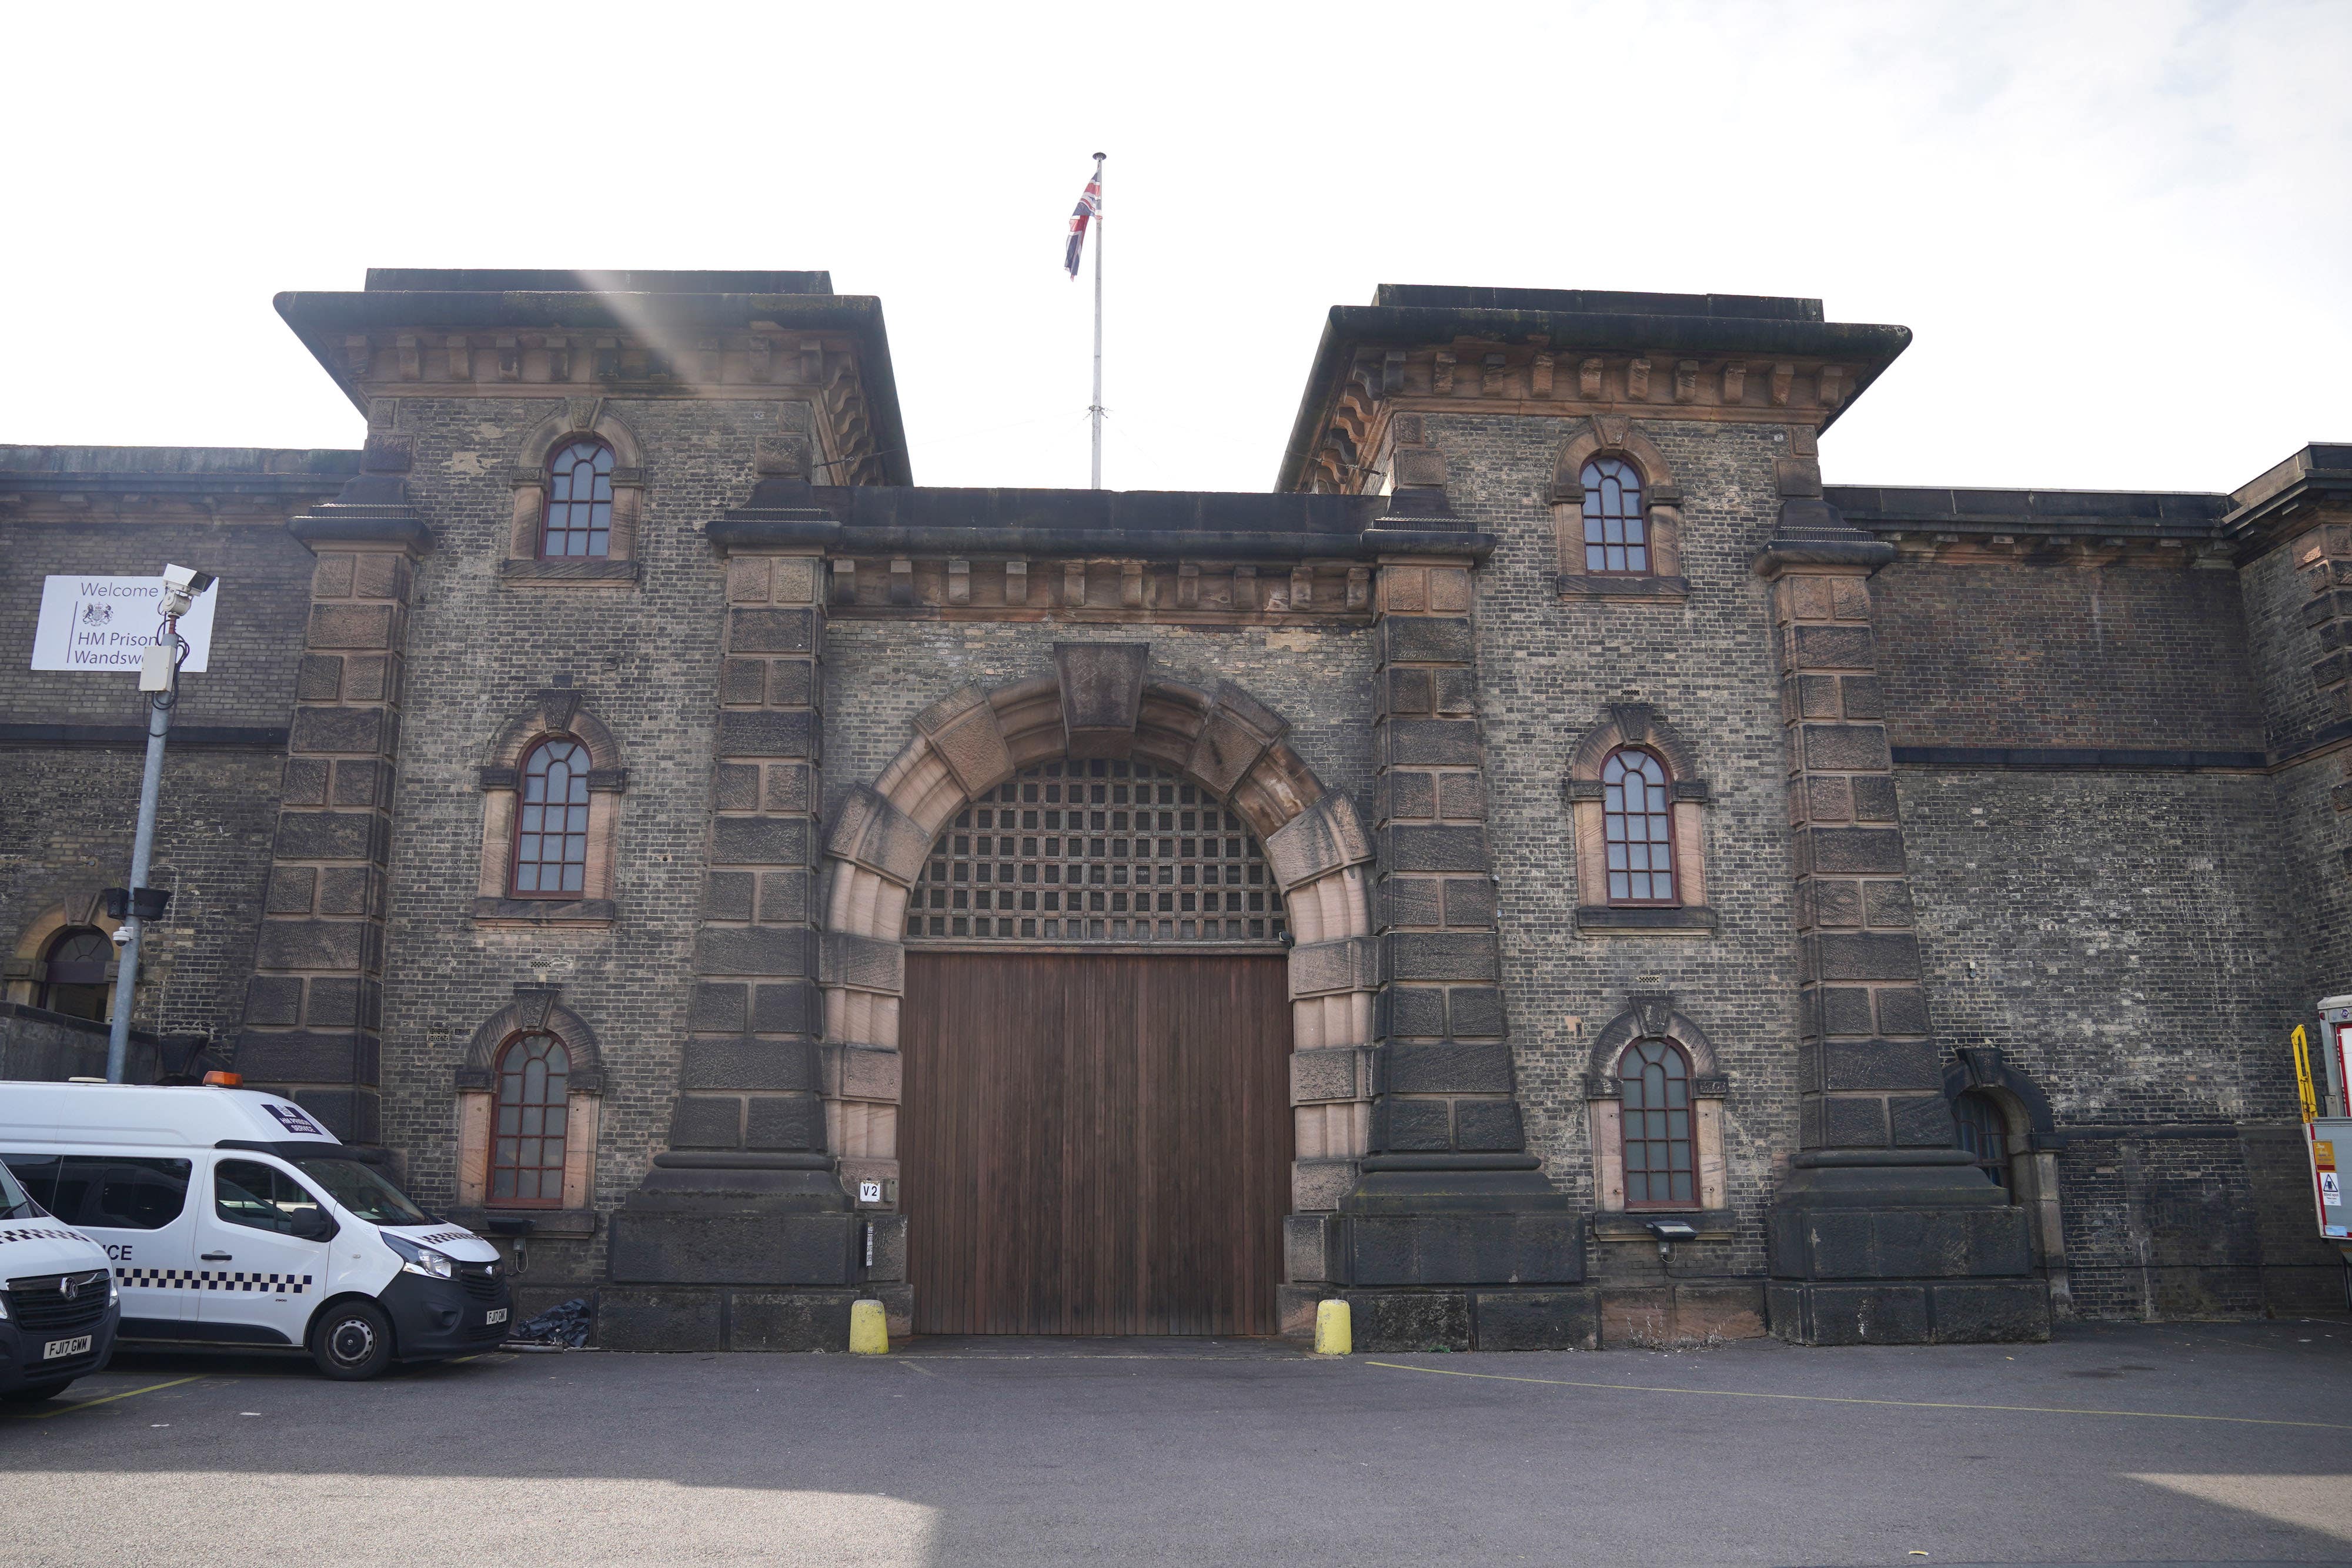 <p>I served two years in prison, from 2018 to 2019 – first at HMP Wandsworth, and then at HMP Ford</p>